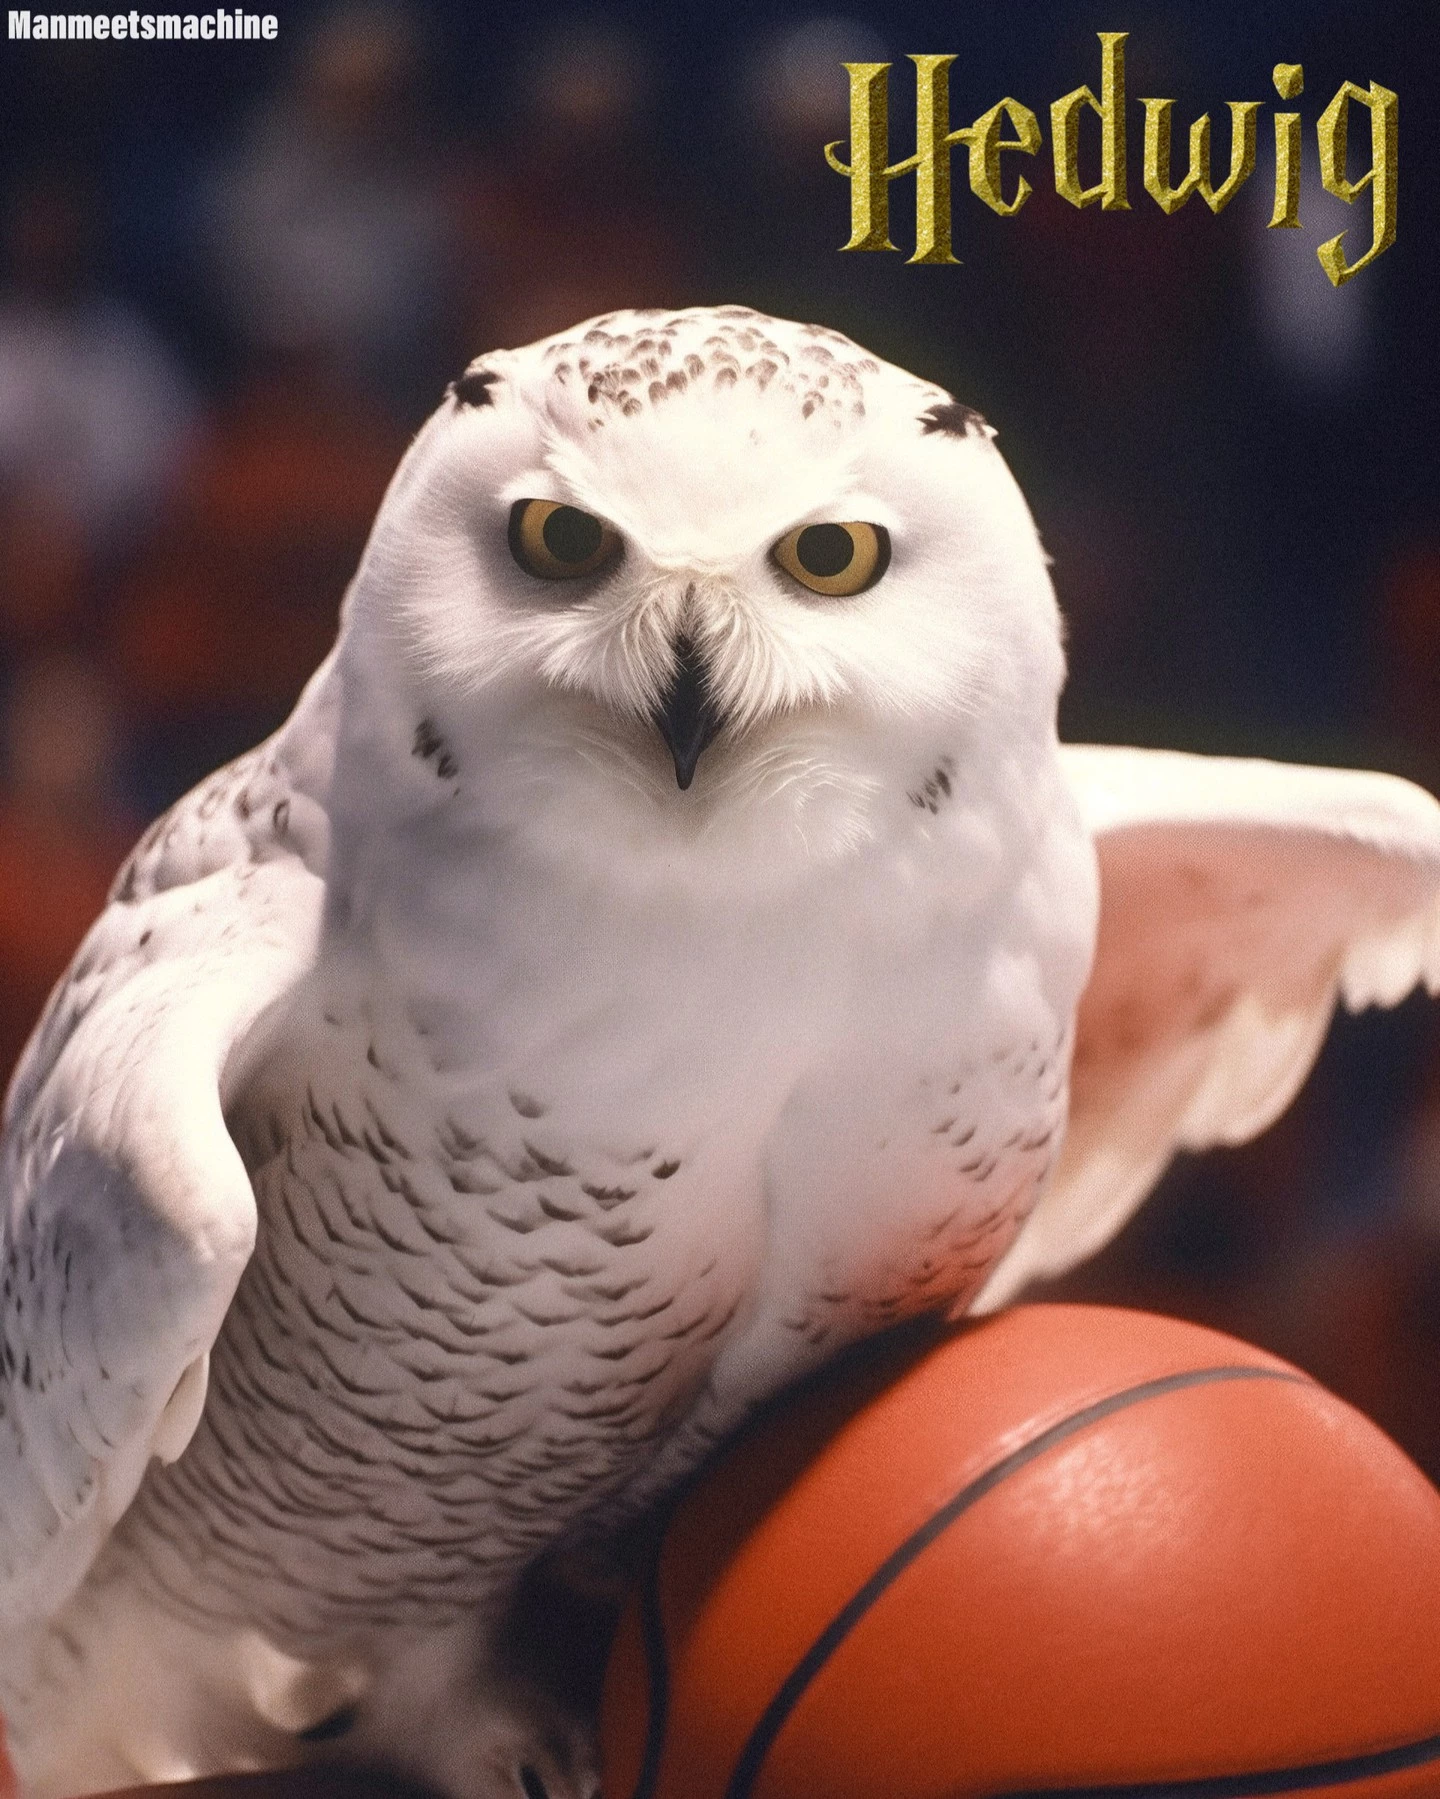 And Here We Have Hedwig, The Team’s Official Mascot